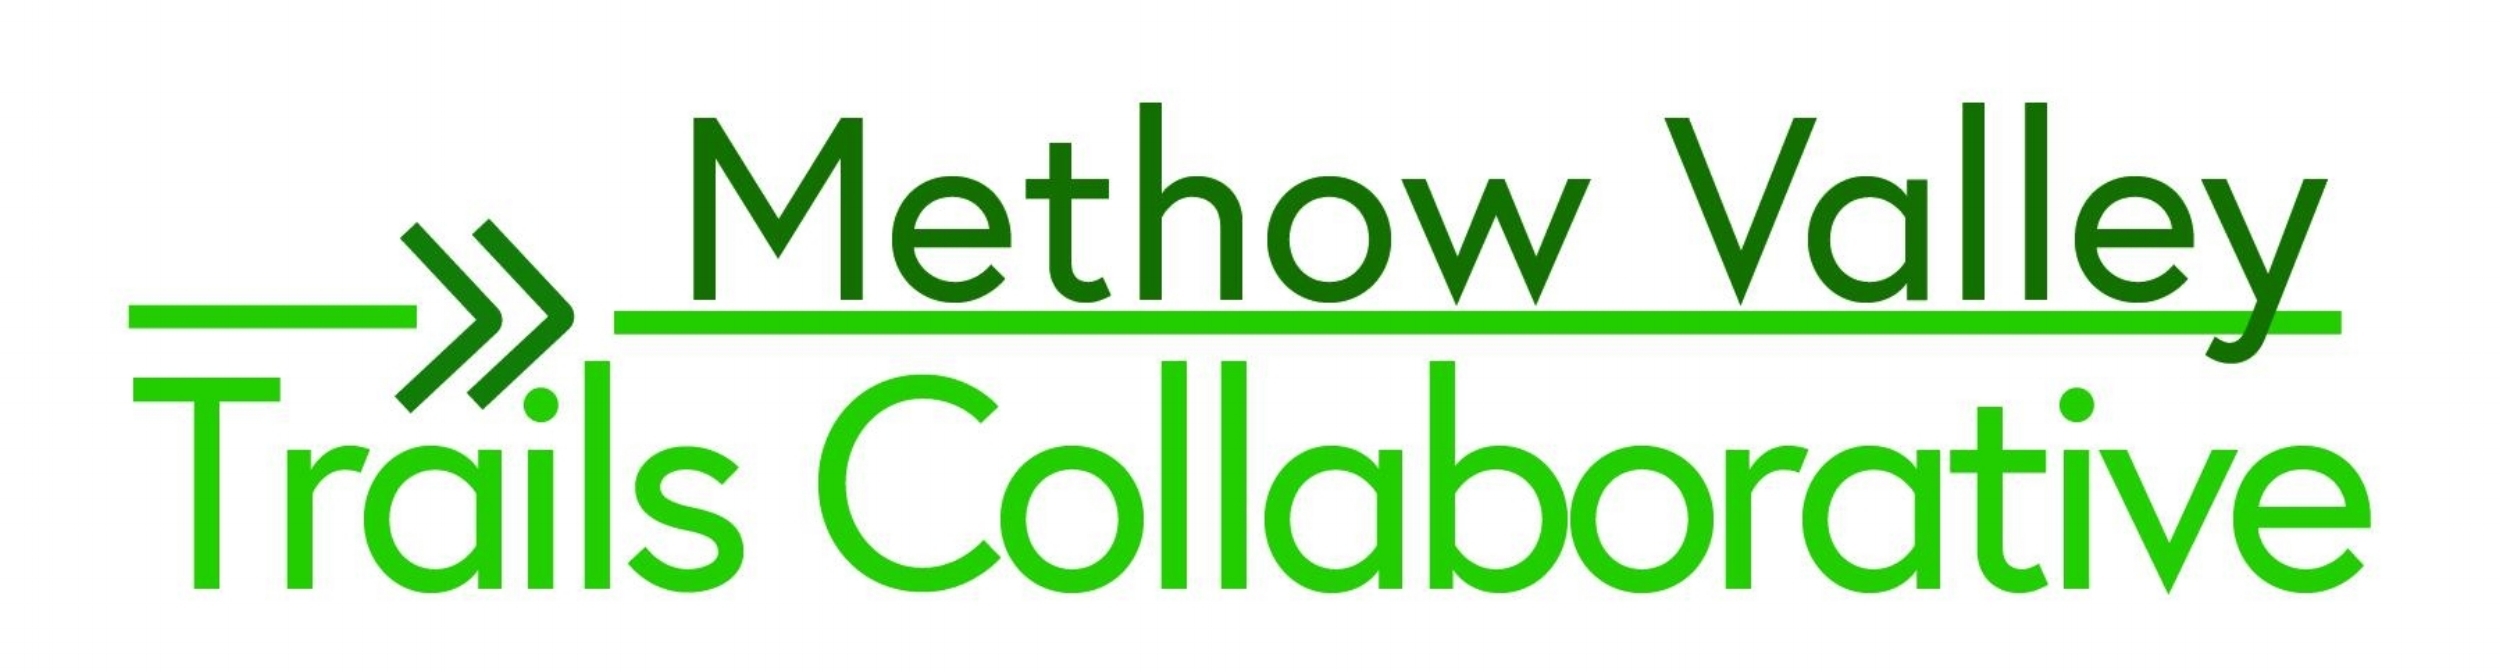 Methow Valley Trails Collaborative